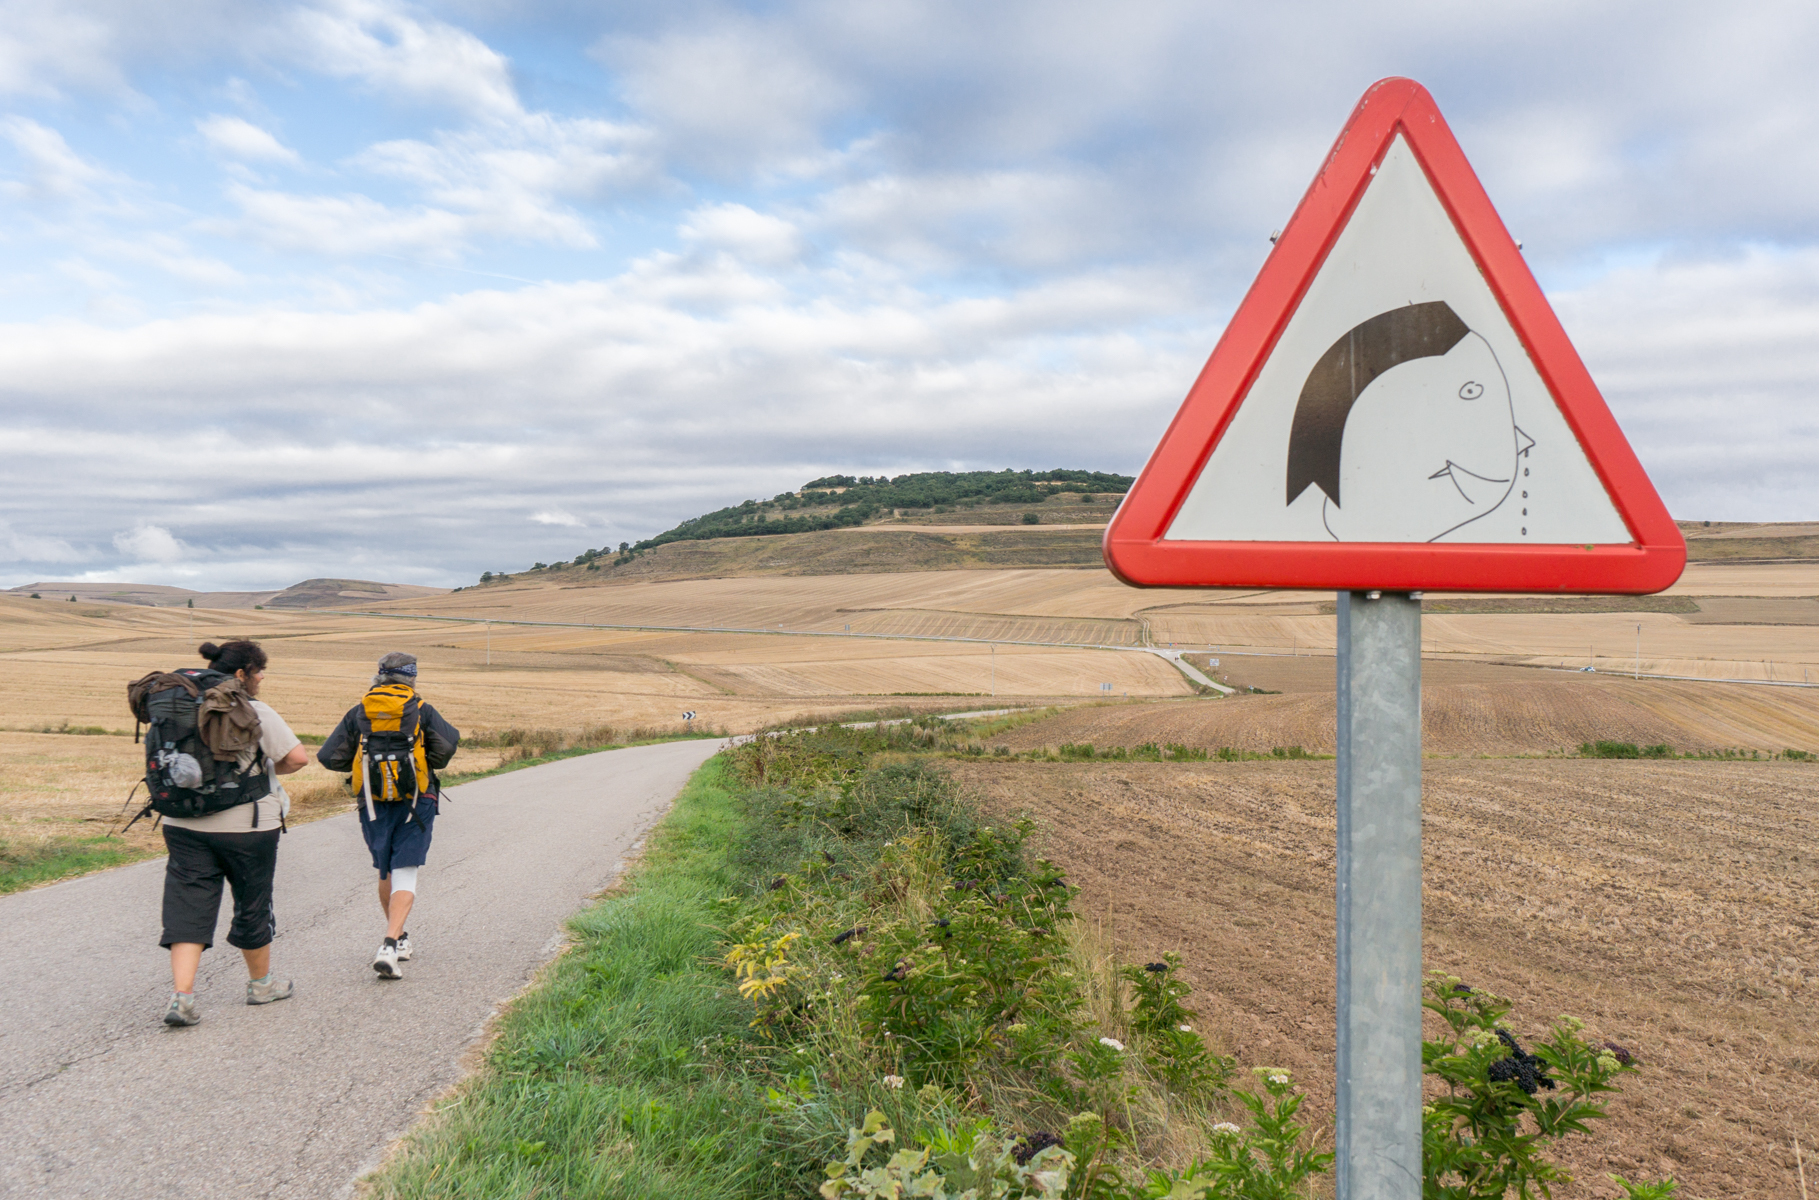 Camino pilgrims walk past a humorously modified traffic sign approximately 0.7 km (0.43 miles) west of Viloria de Rioja, Spain | Photo by Mike Hudak